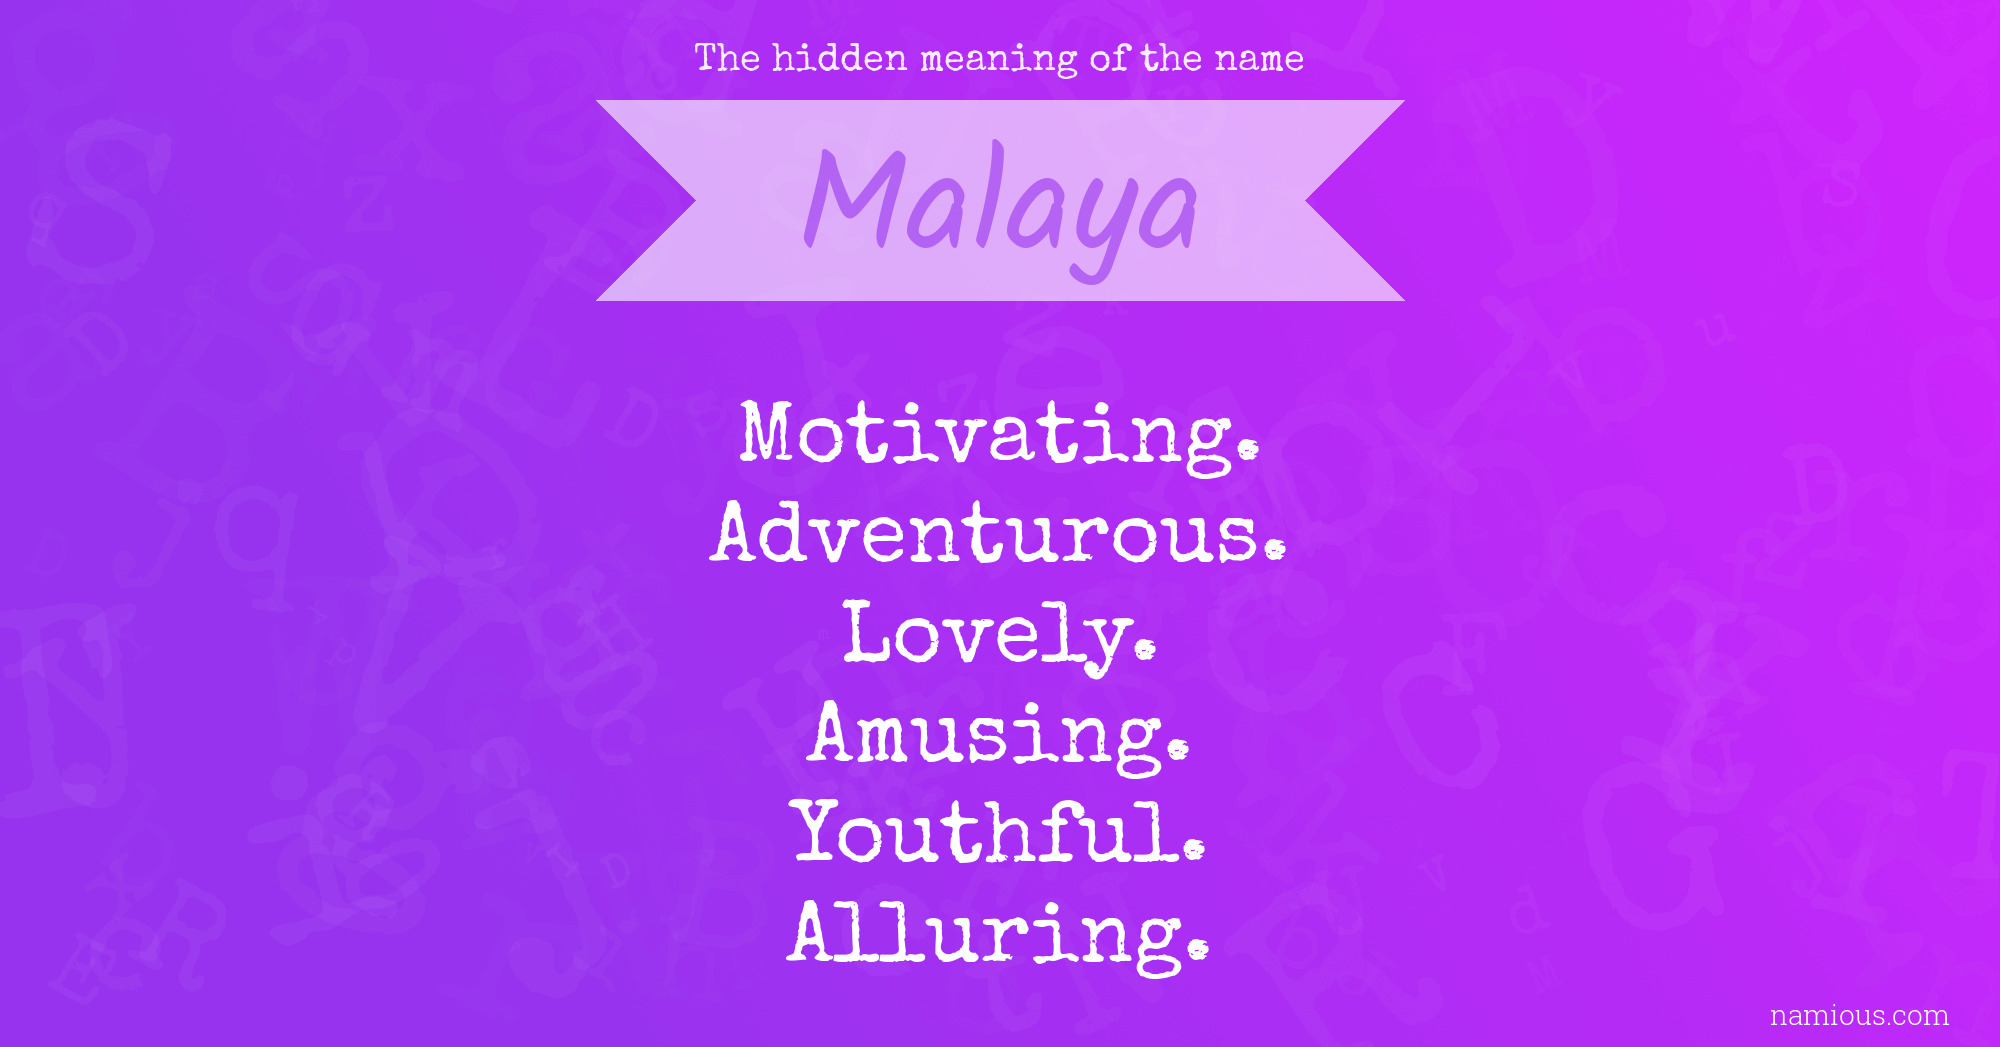 The hidden meaning of the name Malaya